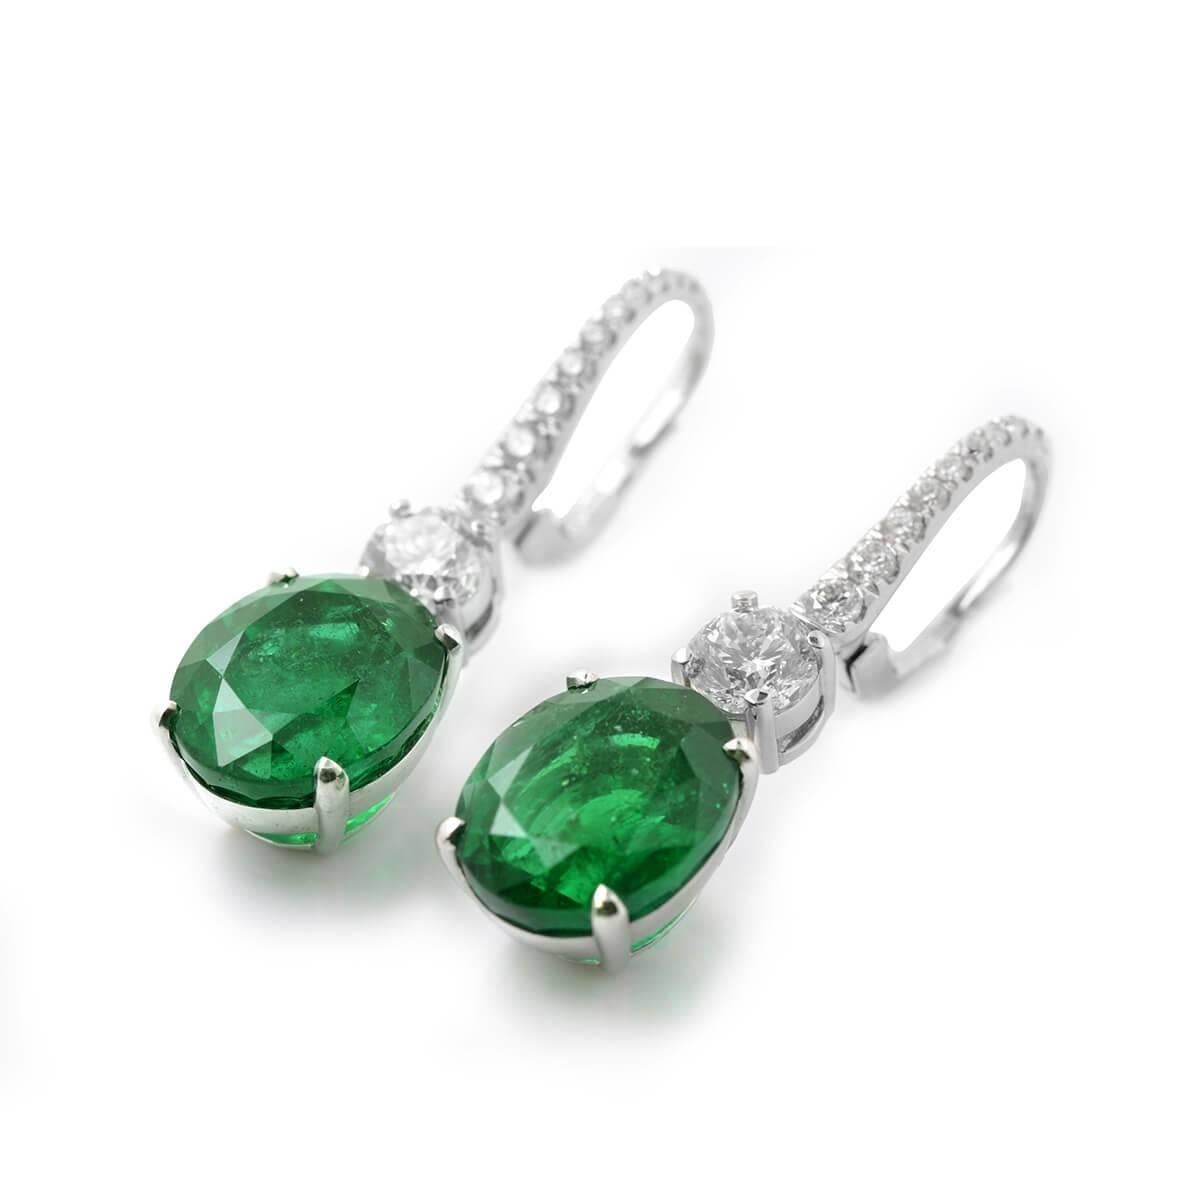 EMERALD DIAMOND EARRINGS - 15.23


Set in 18K White gold


Total emerald weight: 13.45 ct
[ 2 stones ]
Color: Vivid green
Origin: Zambia

Total white diamond weight:1.78 ct
[ 122 diamonds ]
Color: E
Clarity: VS
Total earrings weight: 9.98